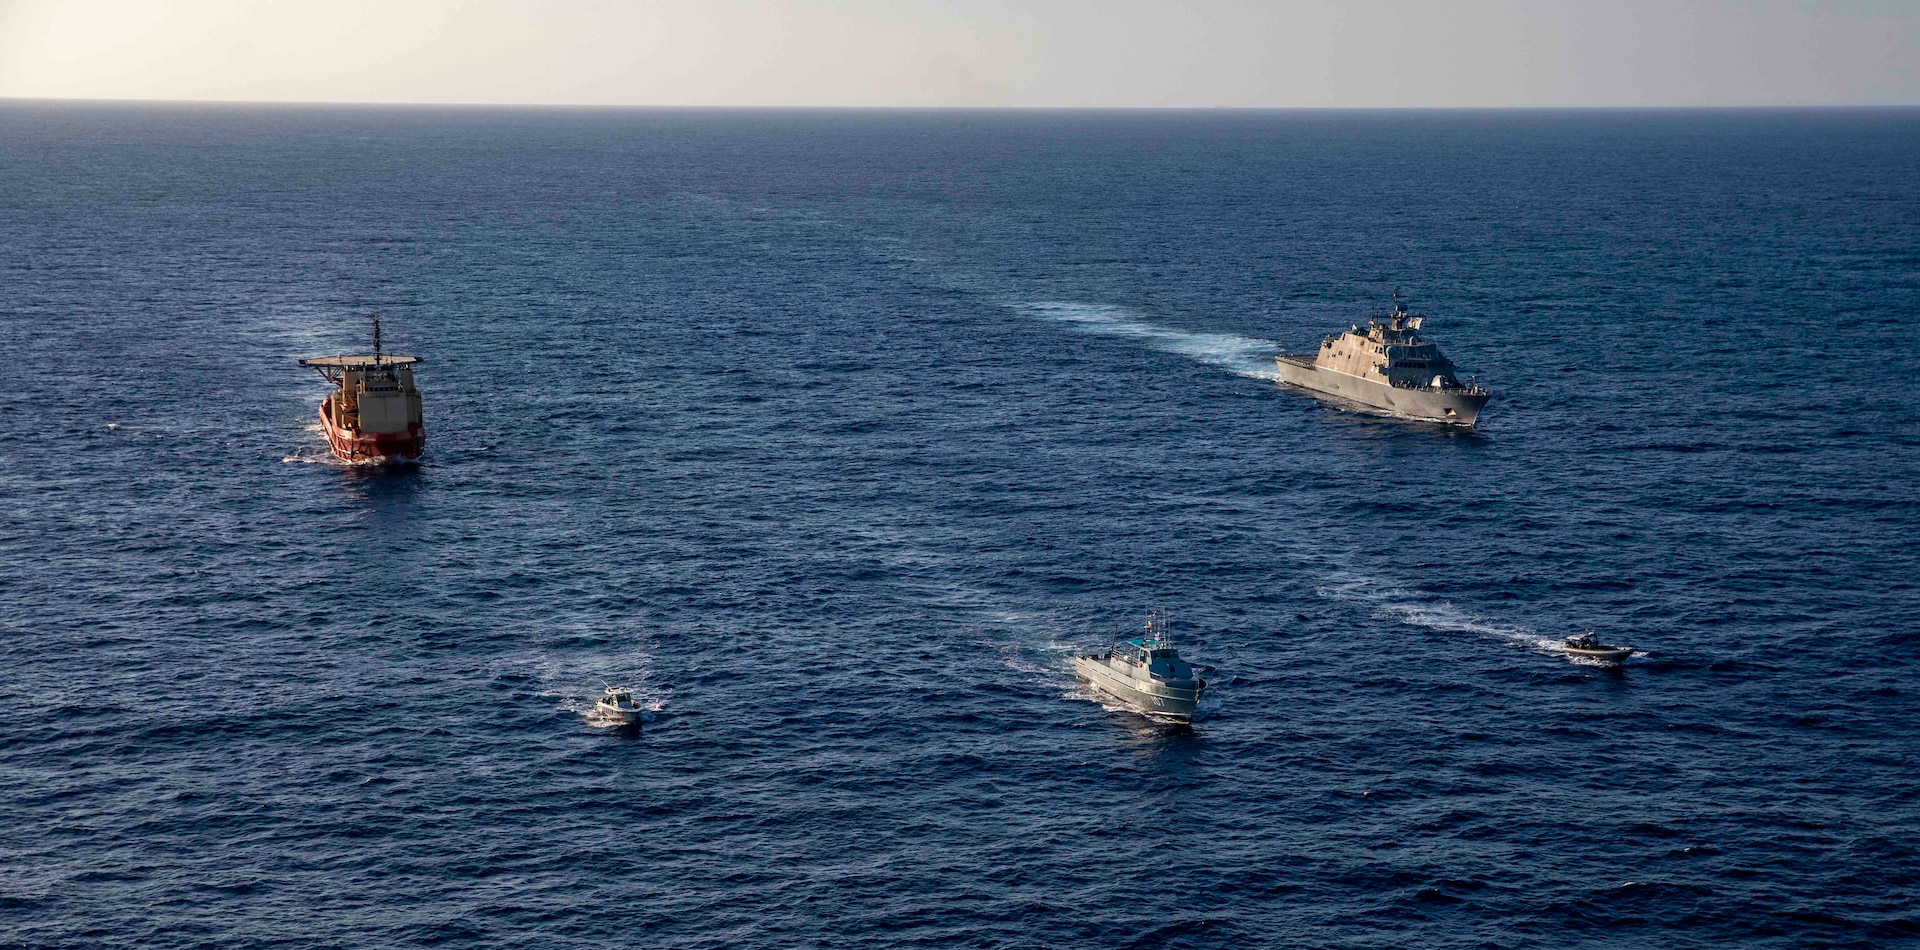 The Freedom-variant littoral combat ship USS Billings (LCS 15), participates in a photo exercise with the Dominican Republic navy coastal patrol vessel Canopus (CG 107),  the special mission support U.S. Motor Vessel Kellie Chouest, Oct. 24, 2021.